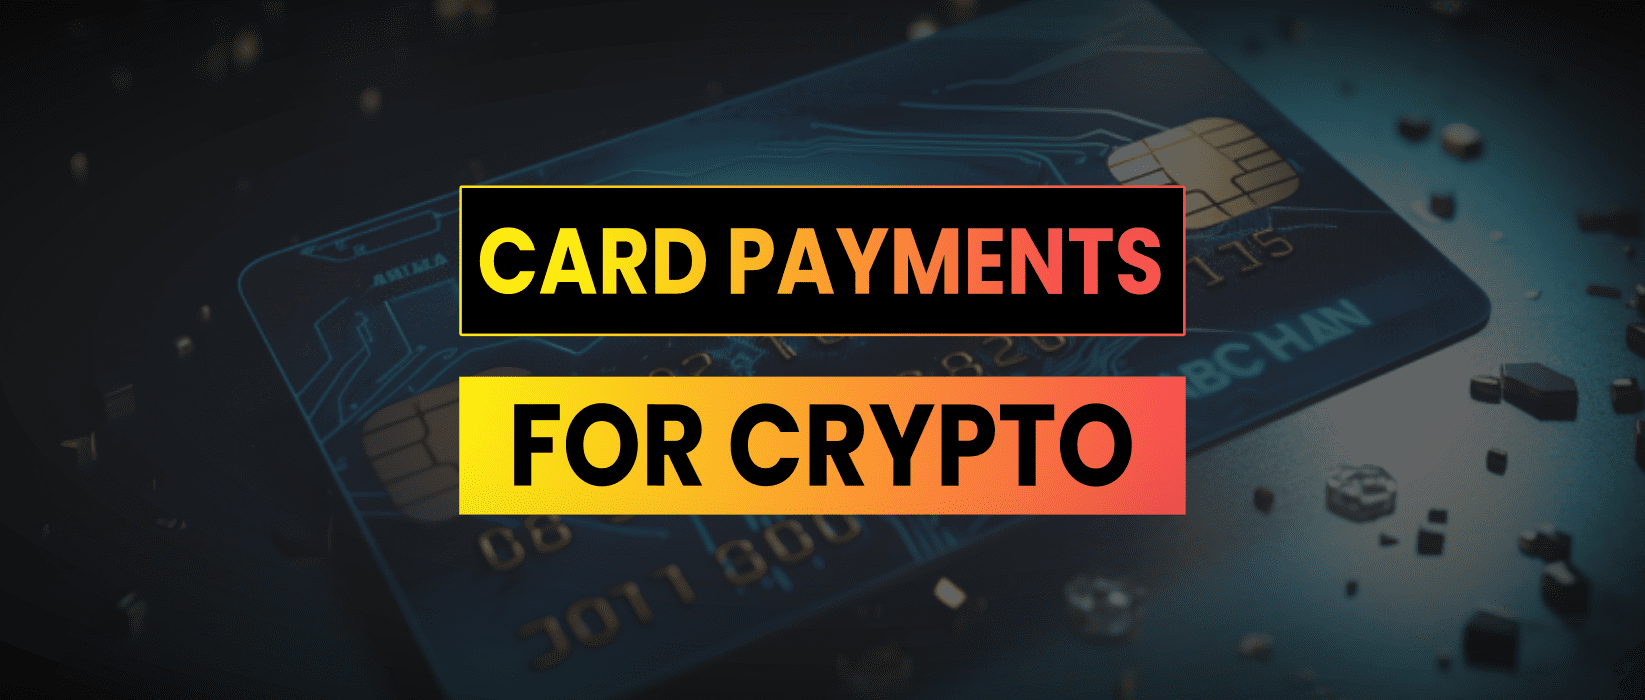 Card Payments For Crypto With Wert